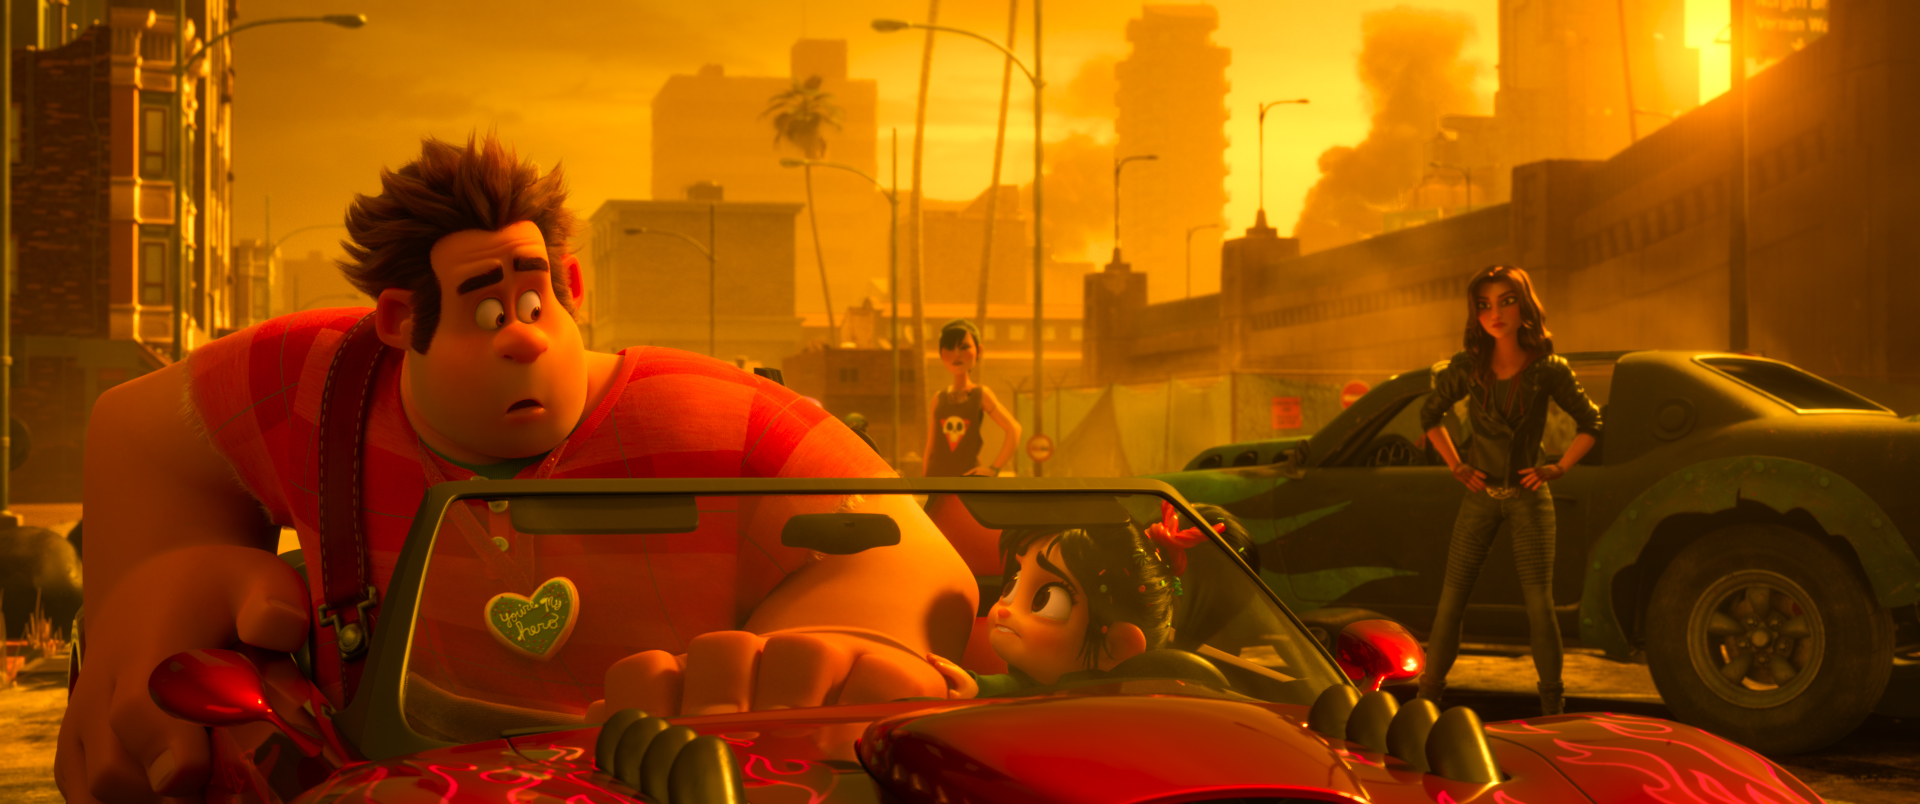 Disney’s Ralph Breaks the Internet Racing to Digital 4K Ultra HD™ and Movies Anywhere on Feb. 12